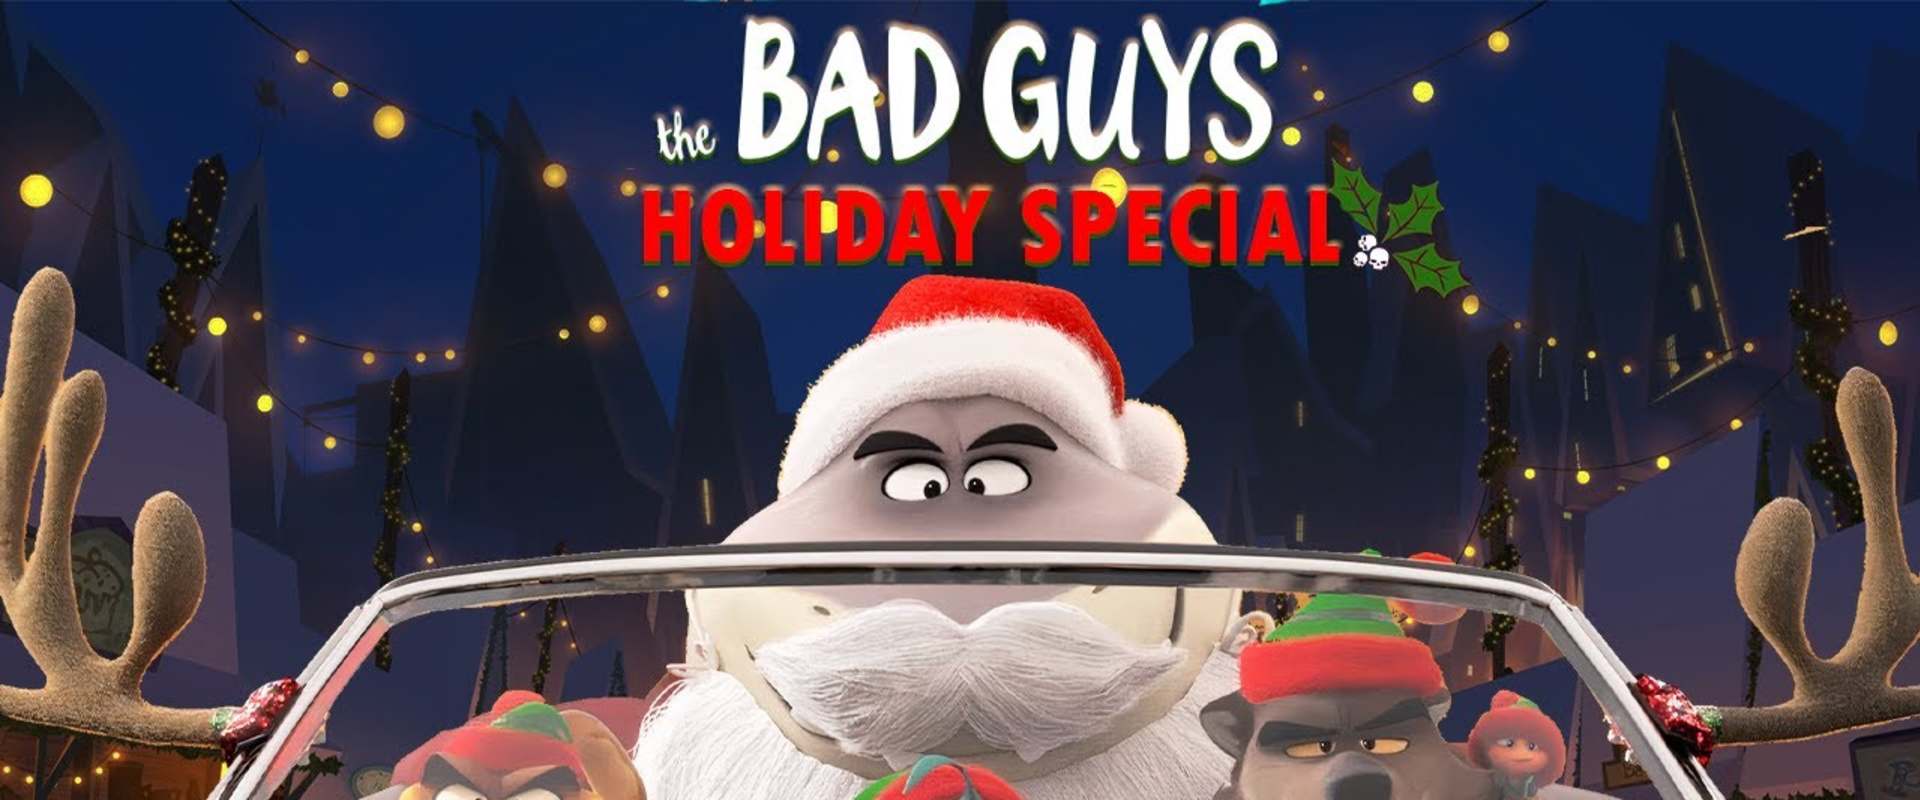 The Bad Guys: A Very Bad Holiday background 2